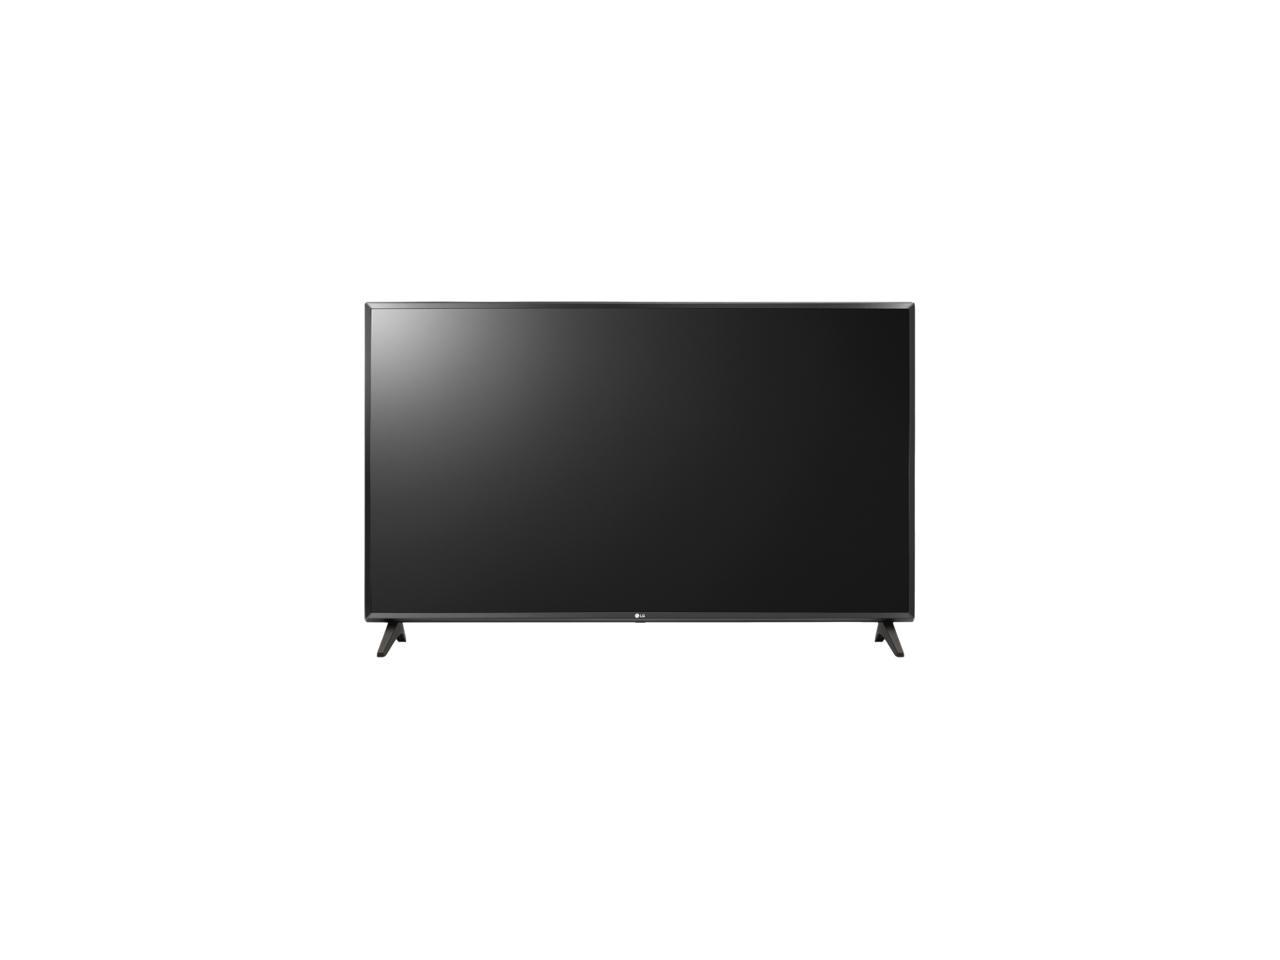 LG 32LT340C0UB 32" HD Commercial TV, HDMI, 1 RS232, USB, Speaker, Stand, Viewing Angle 178°/178° NTSC, Creston Connected, Full IP Control and WOL(Wake-on LAN)